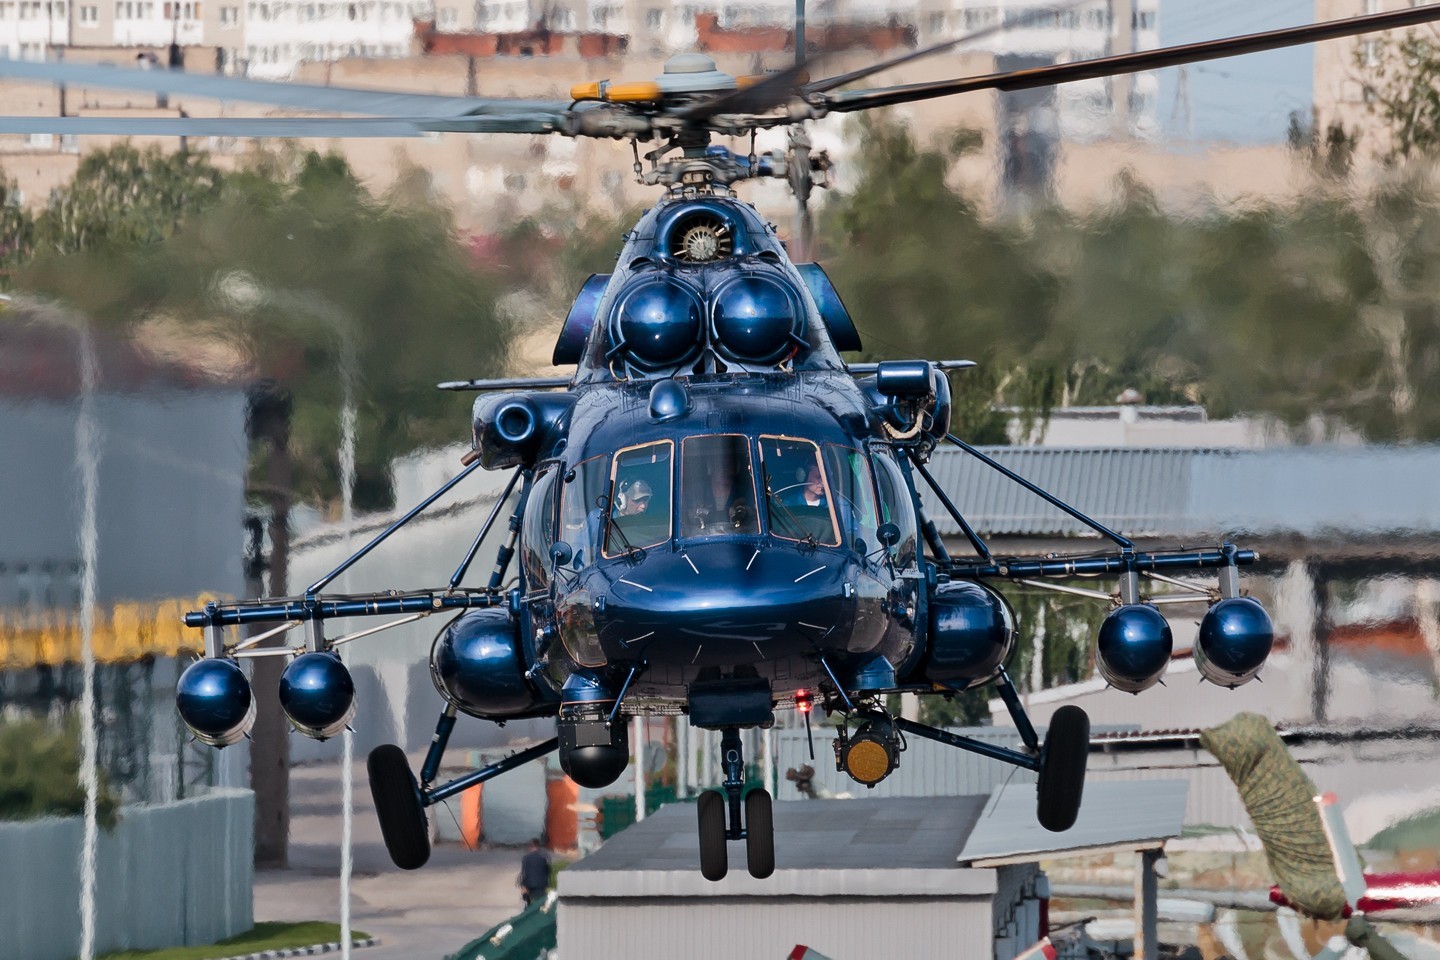 General 1440x960 helicopters vehicle frontal view aircraft Mil Mi-8 Mil Helicopters Russian/Soviet aircraft